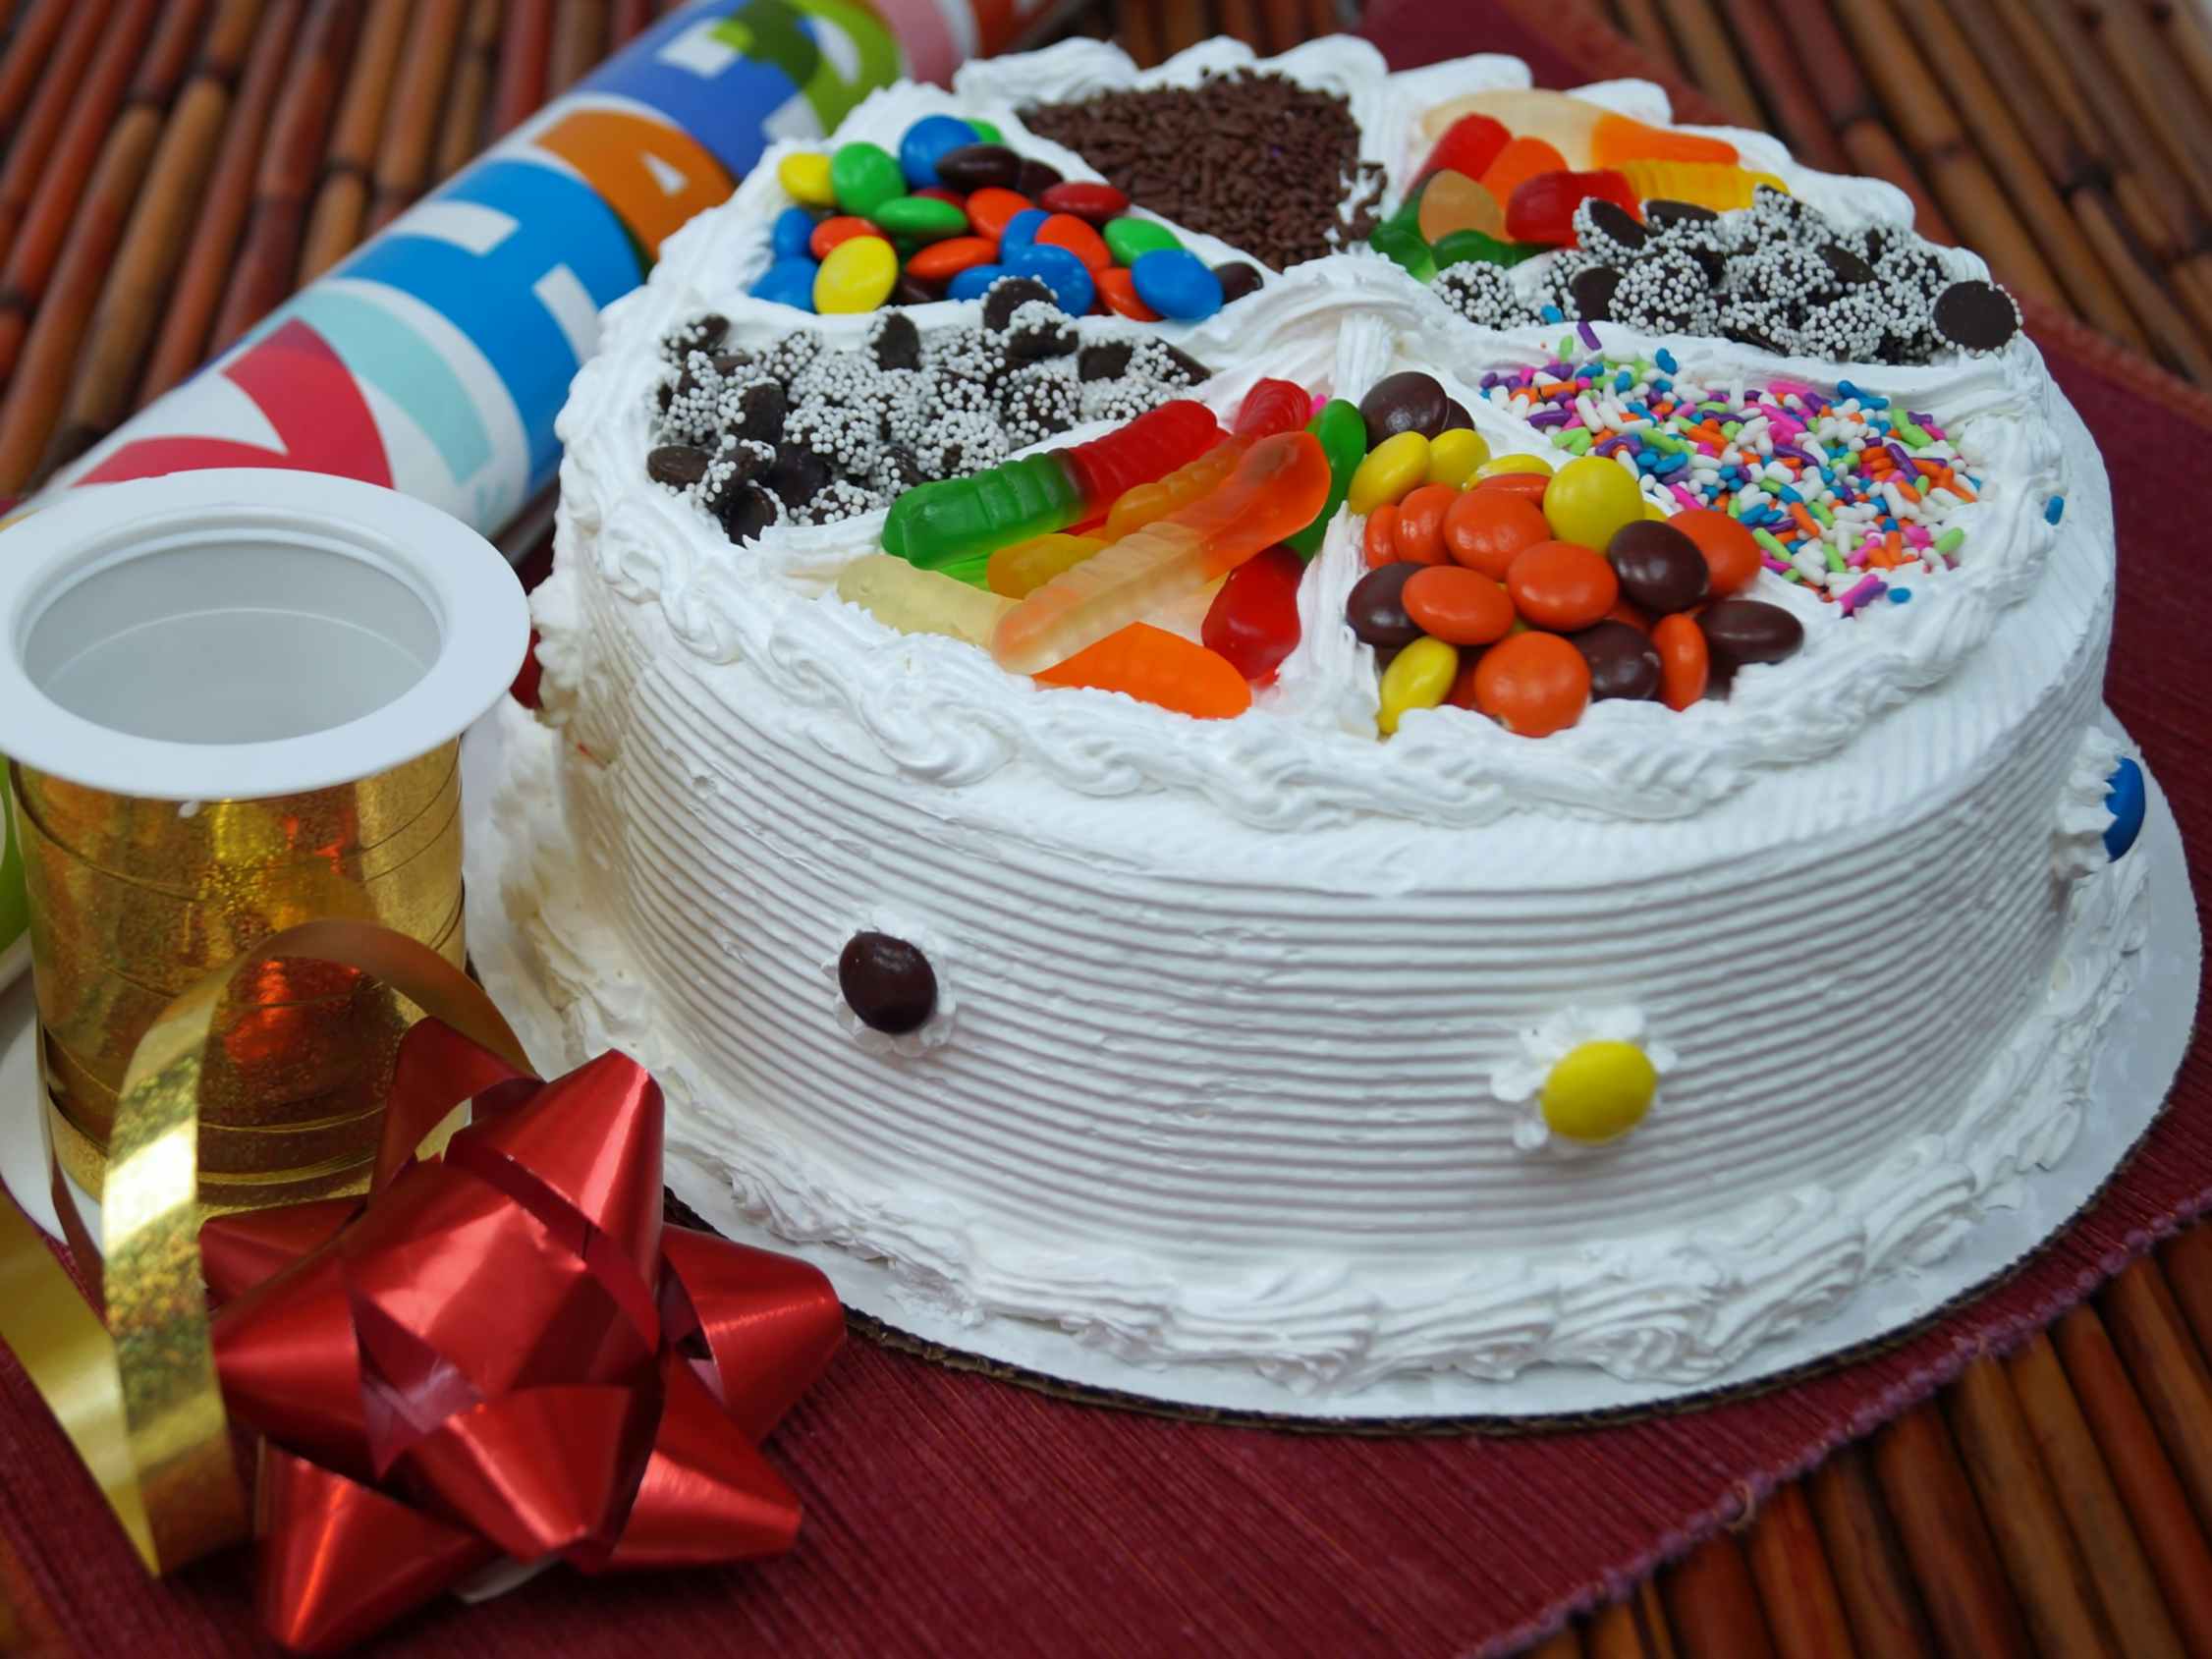 A cake topped with different kinds of candies sitting on a table next to a bow, some ribbon, and wrapping paper.